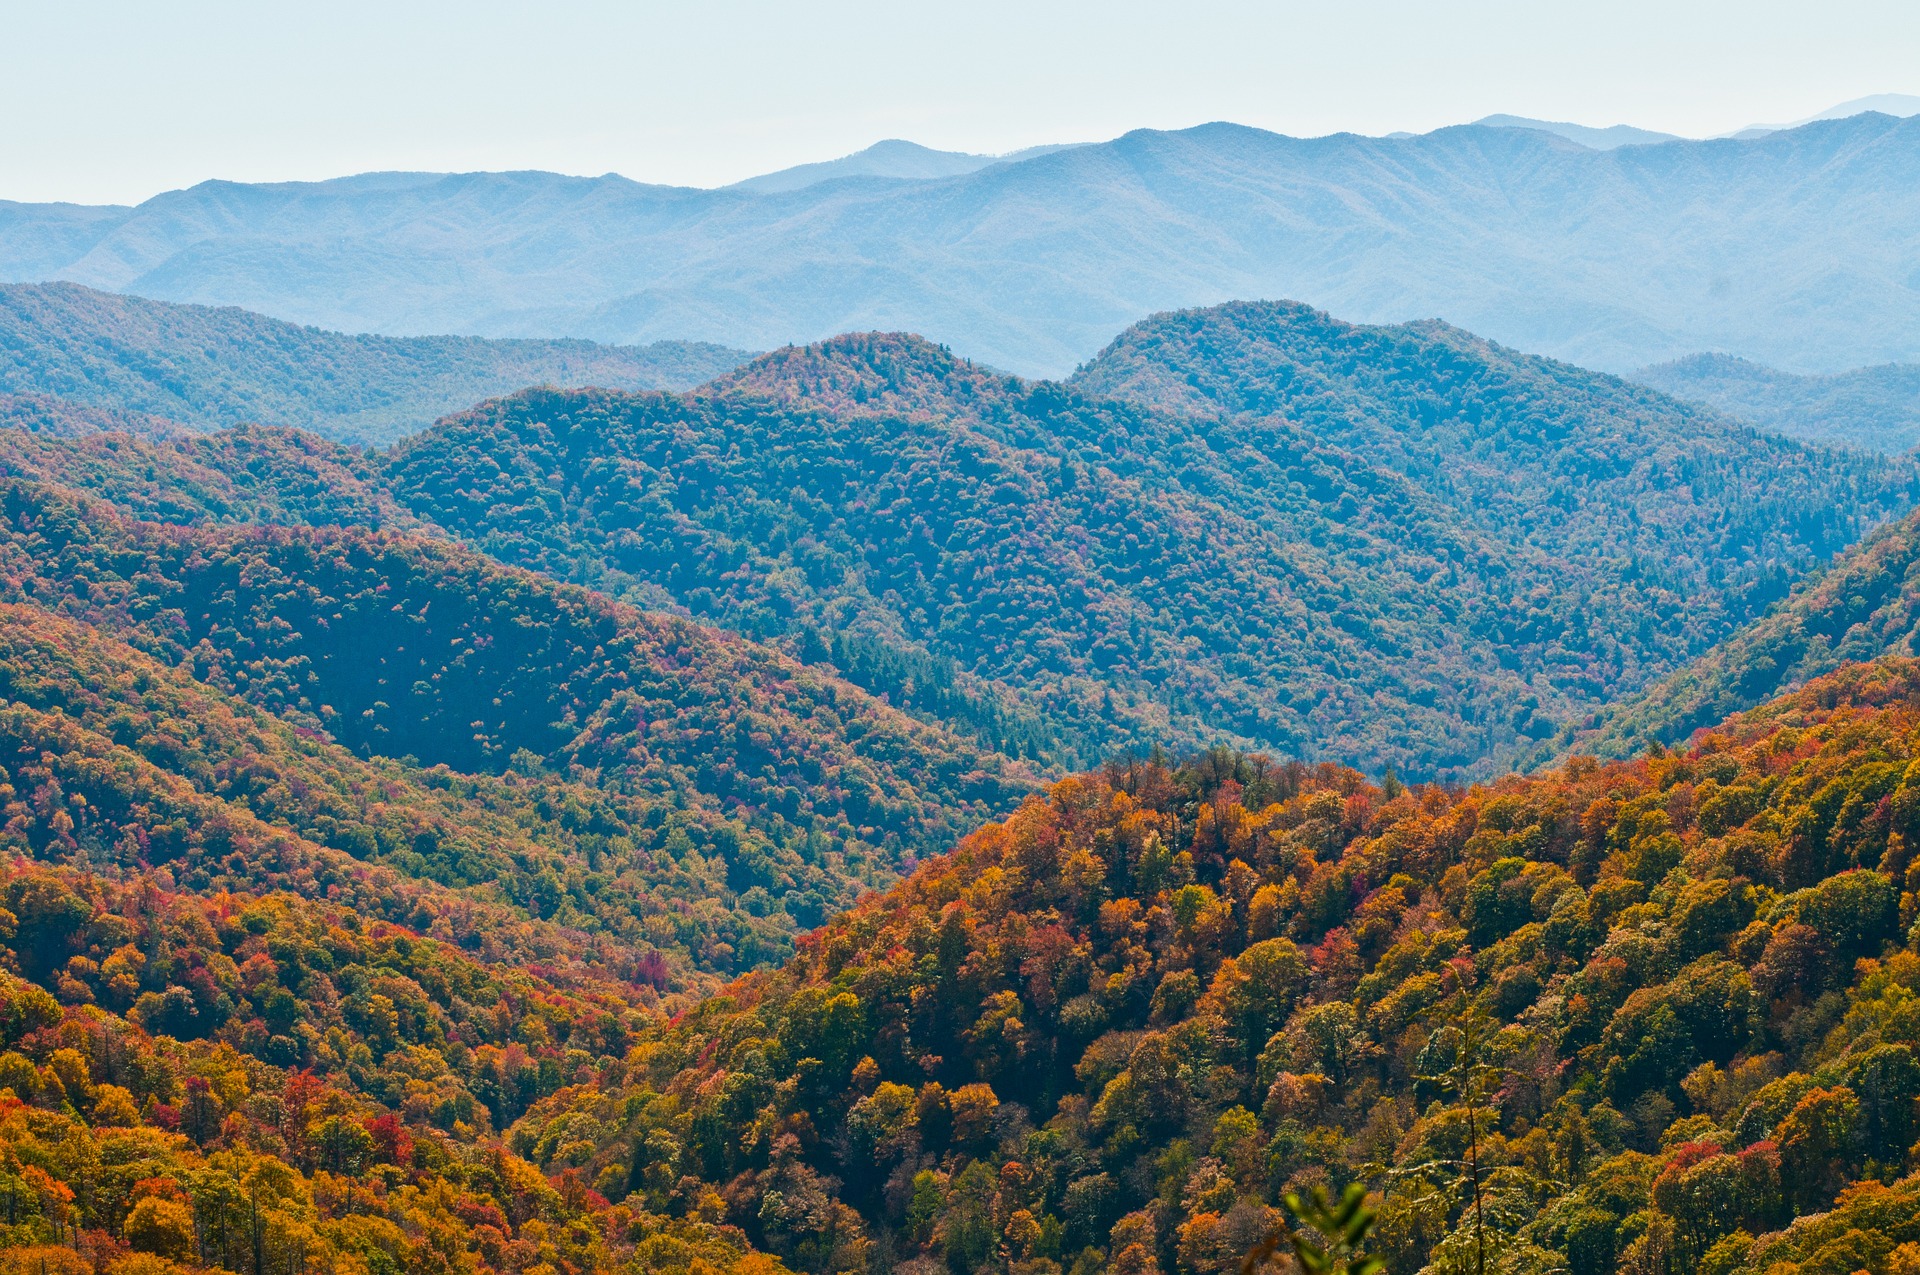 Enjoy a Vacation to Gatlinburg While Working Remote